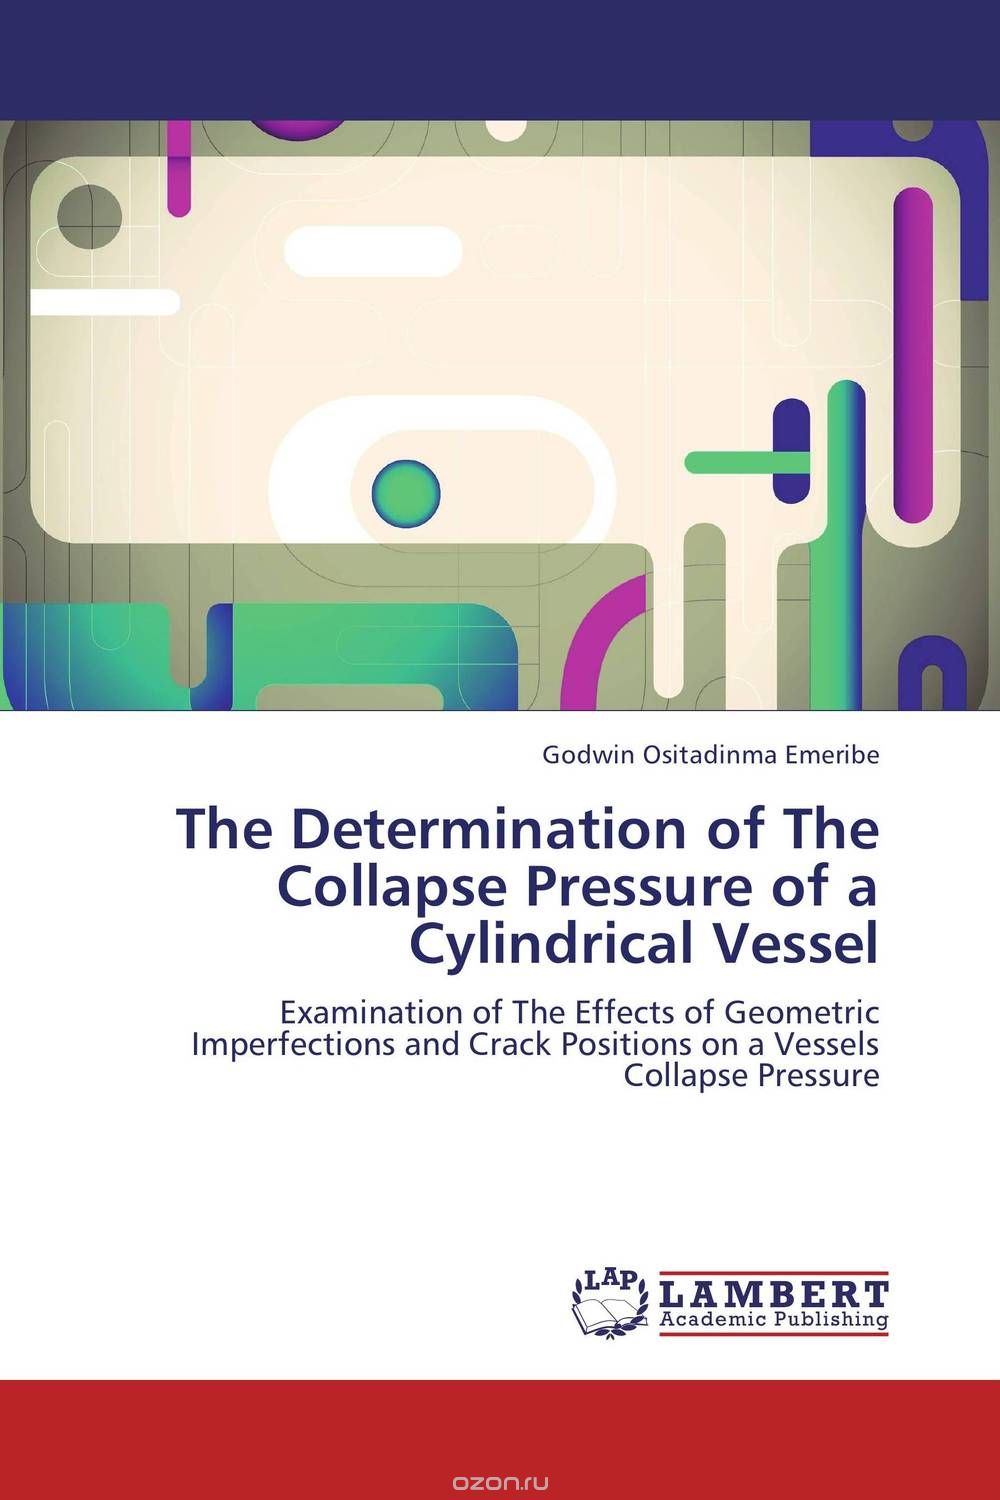 Скачать книгу "The Determination of The Collapse Pressure of a Cylindrical Vessel"